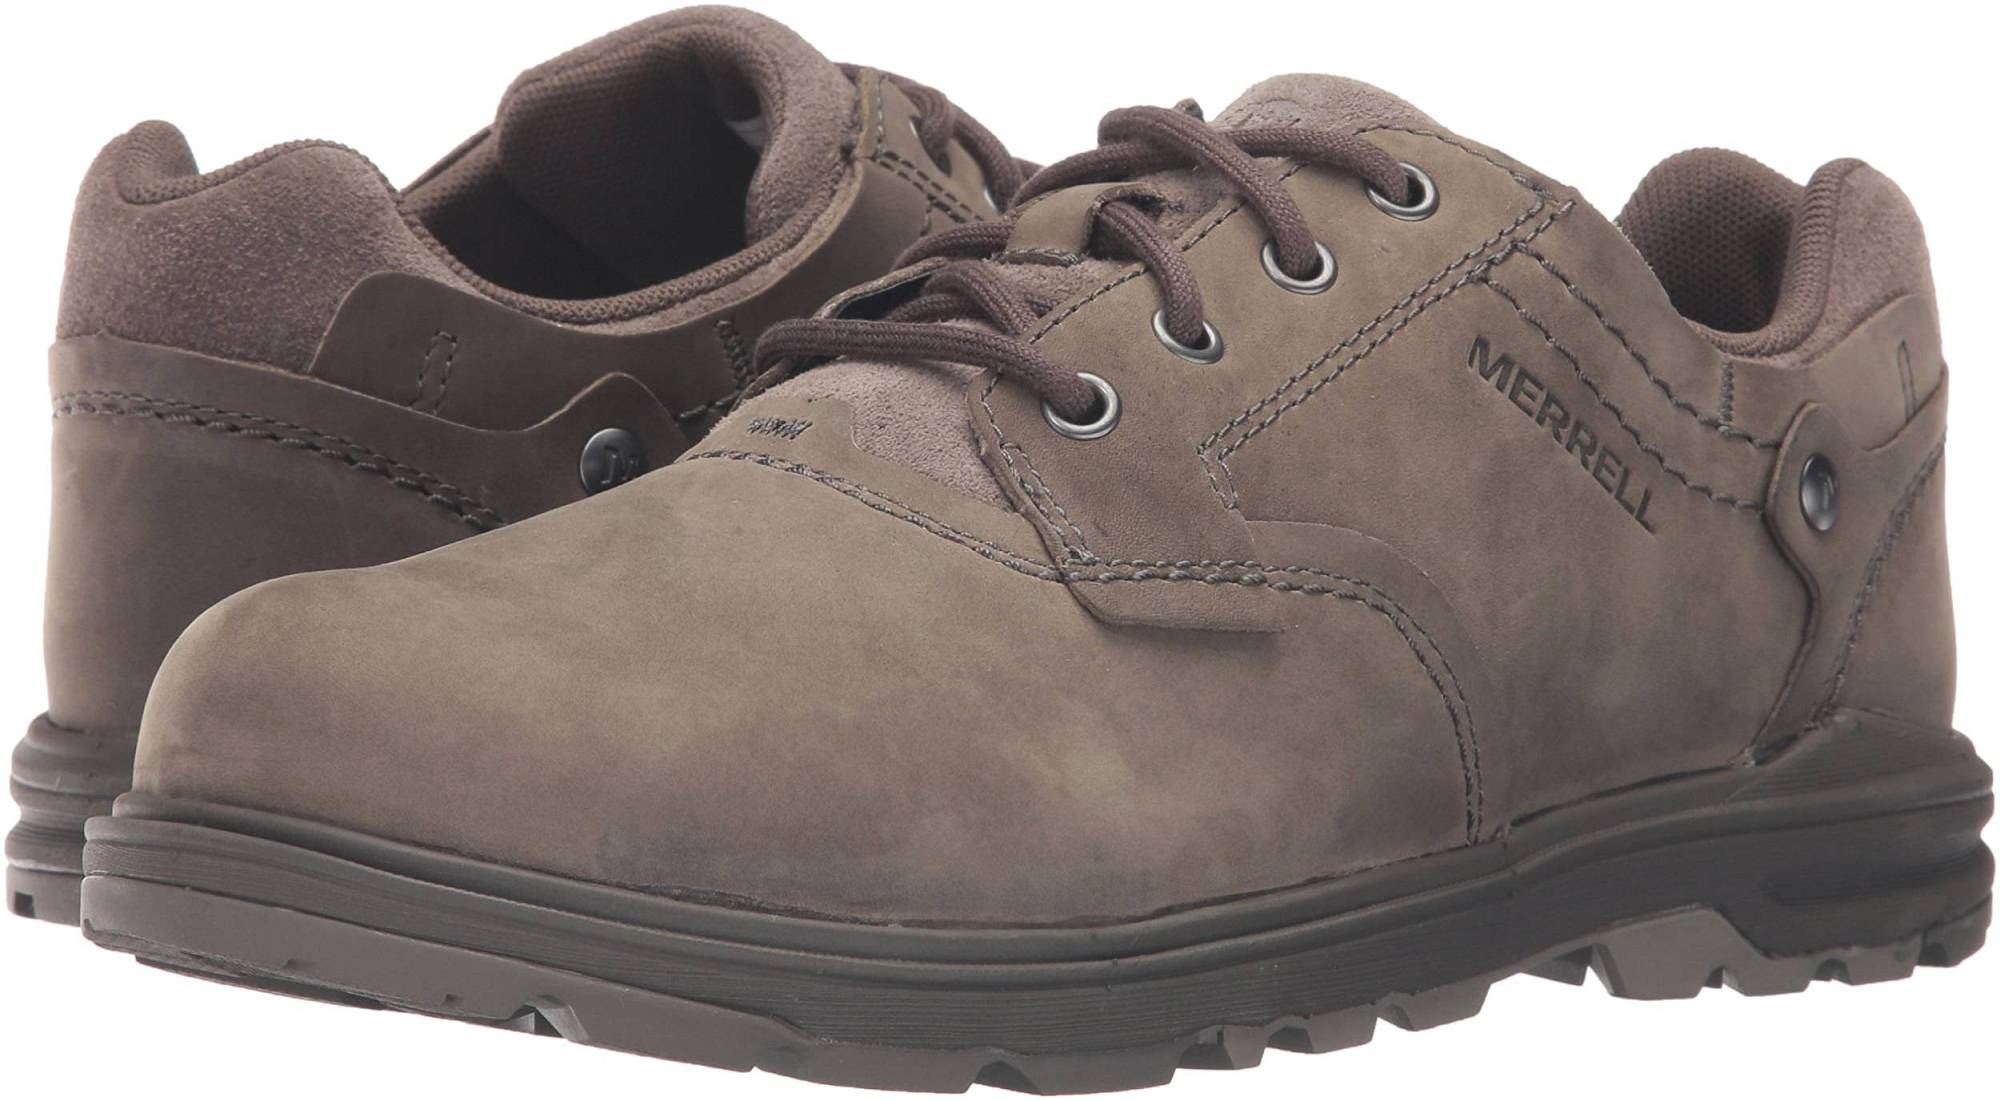 Merrell Brevard Lace – Shoes Reviews & Reasons To Buy